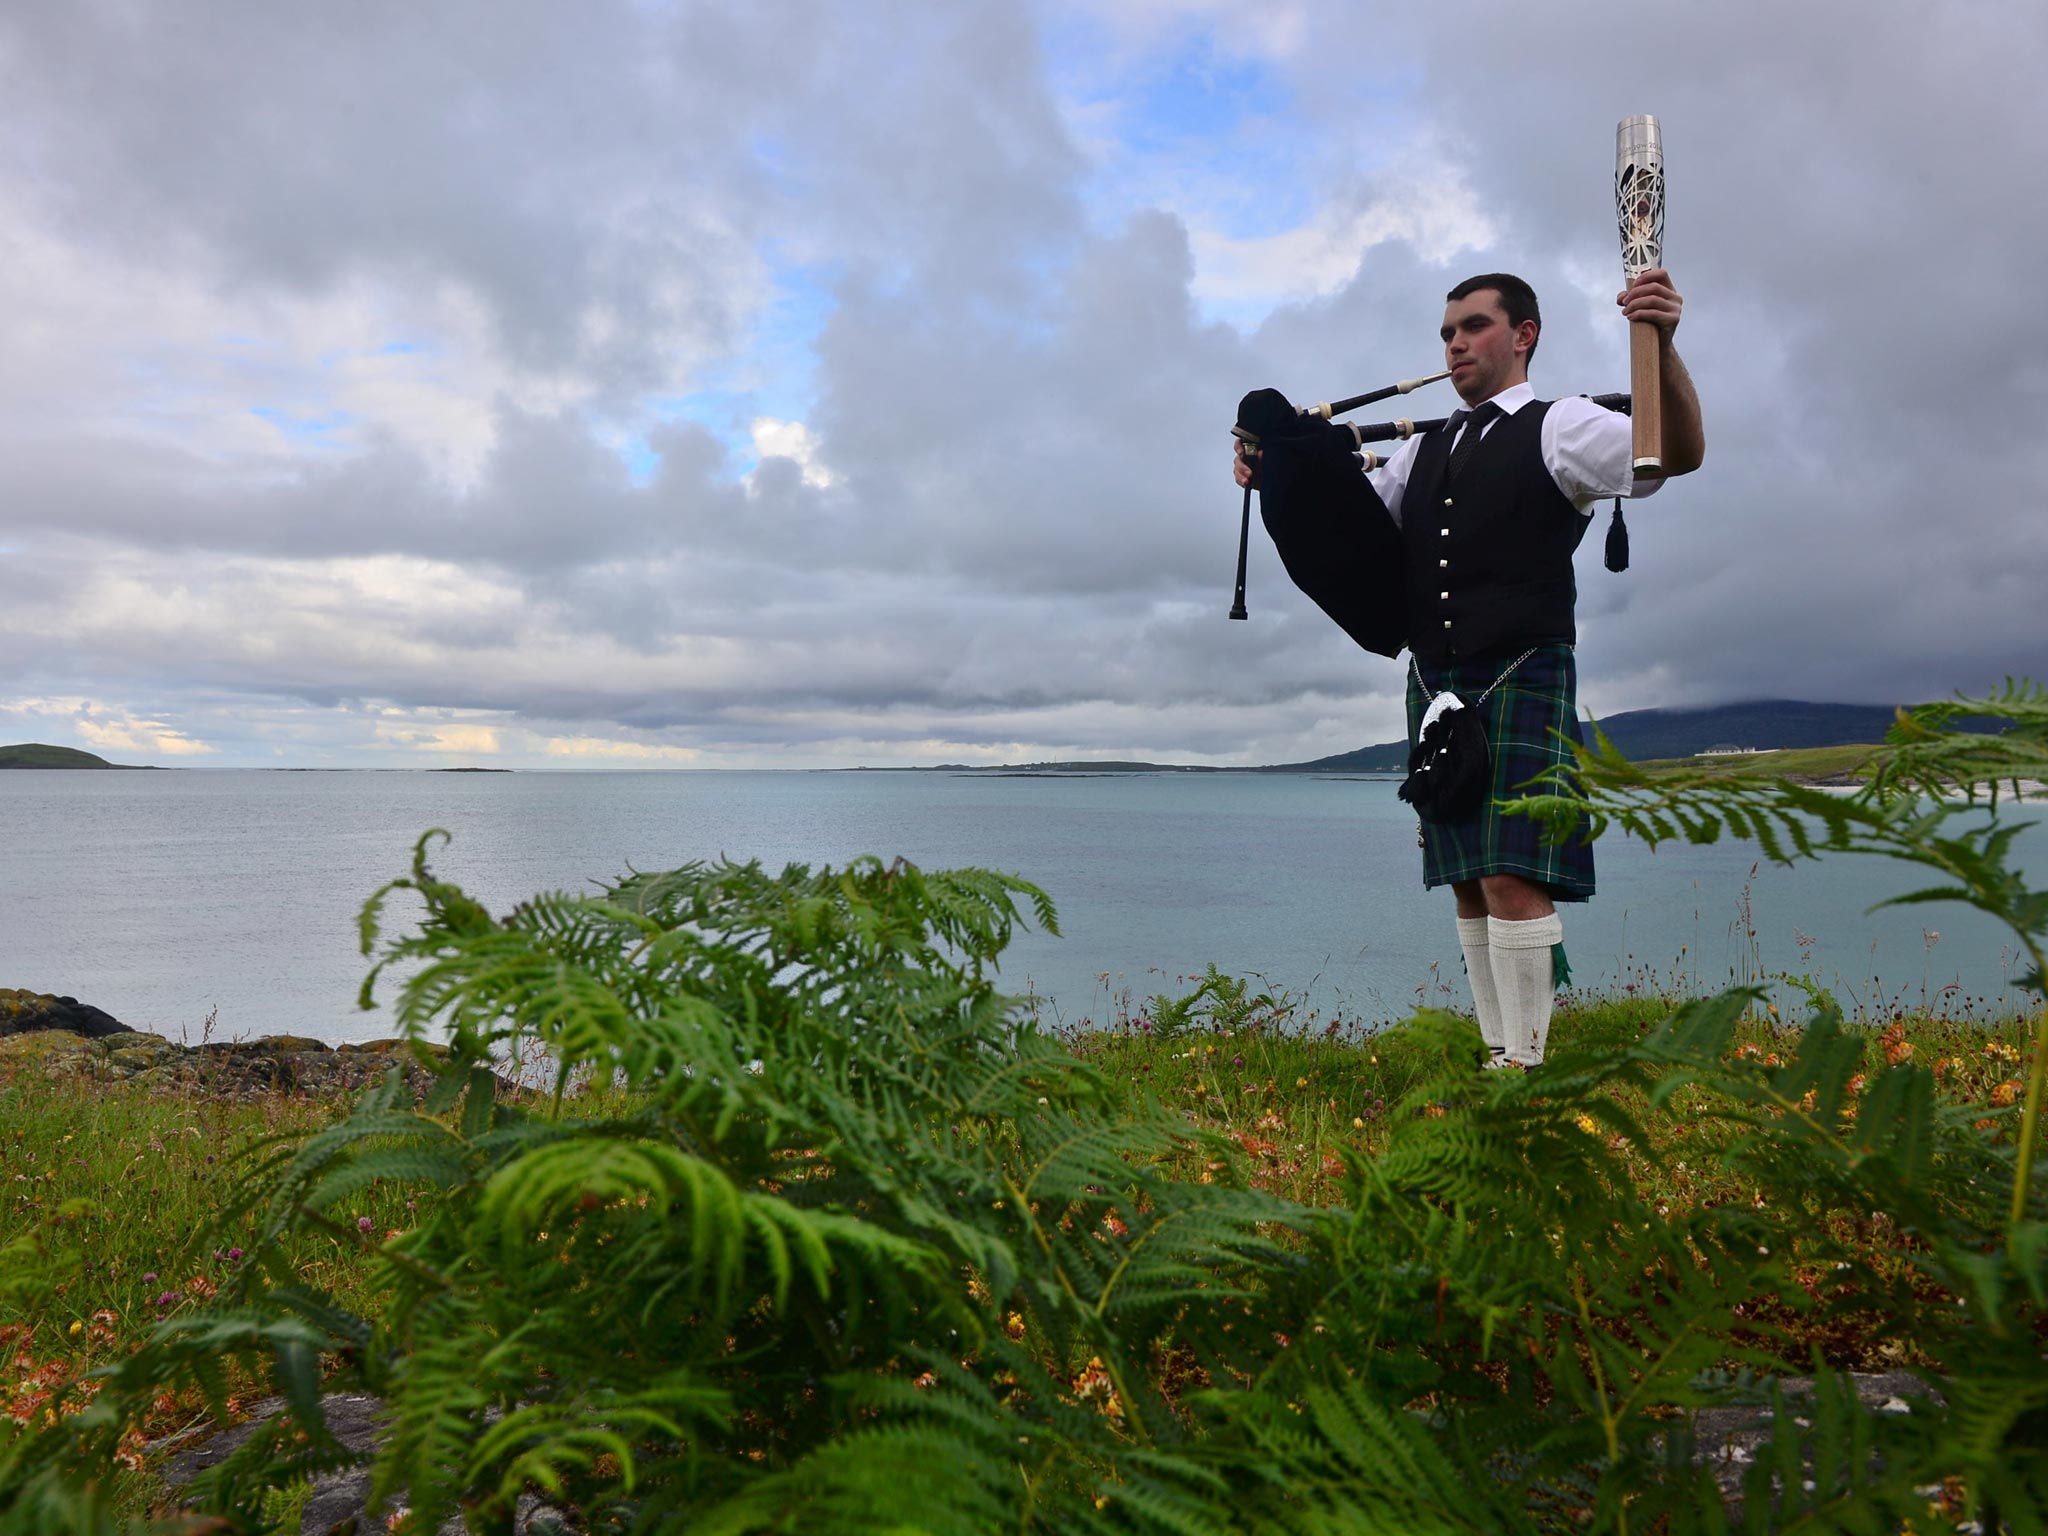 The Glasgow 2014 Queen’s Baton arrives in the Outer
Hebrides this week